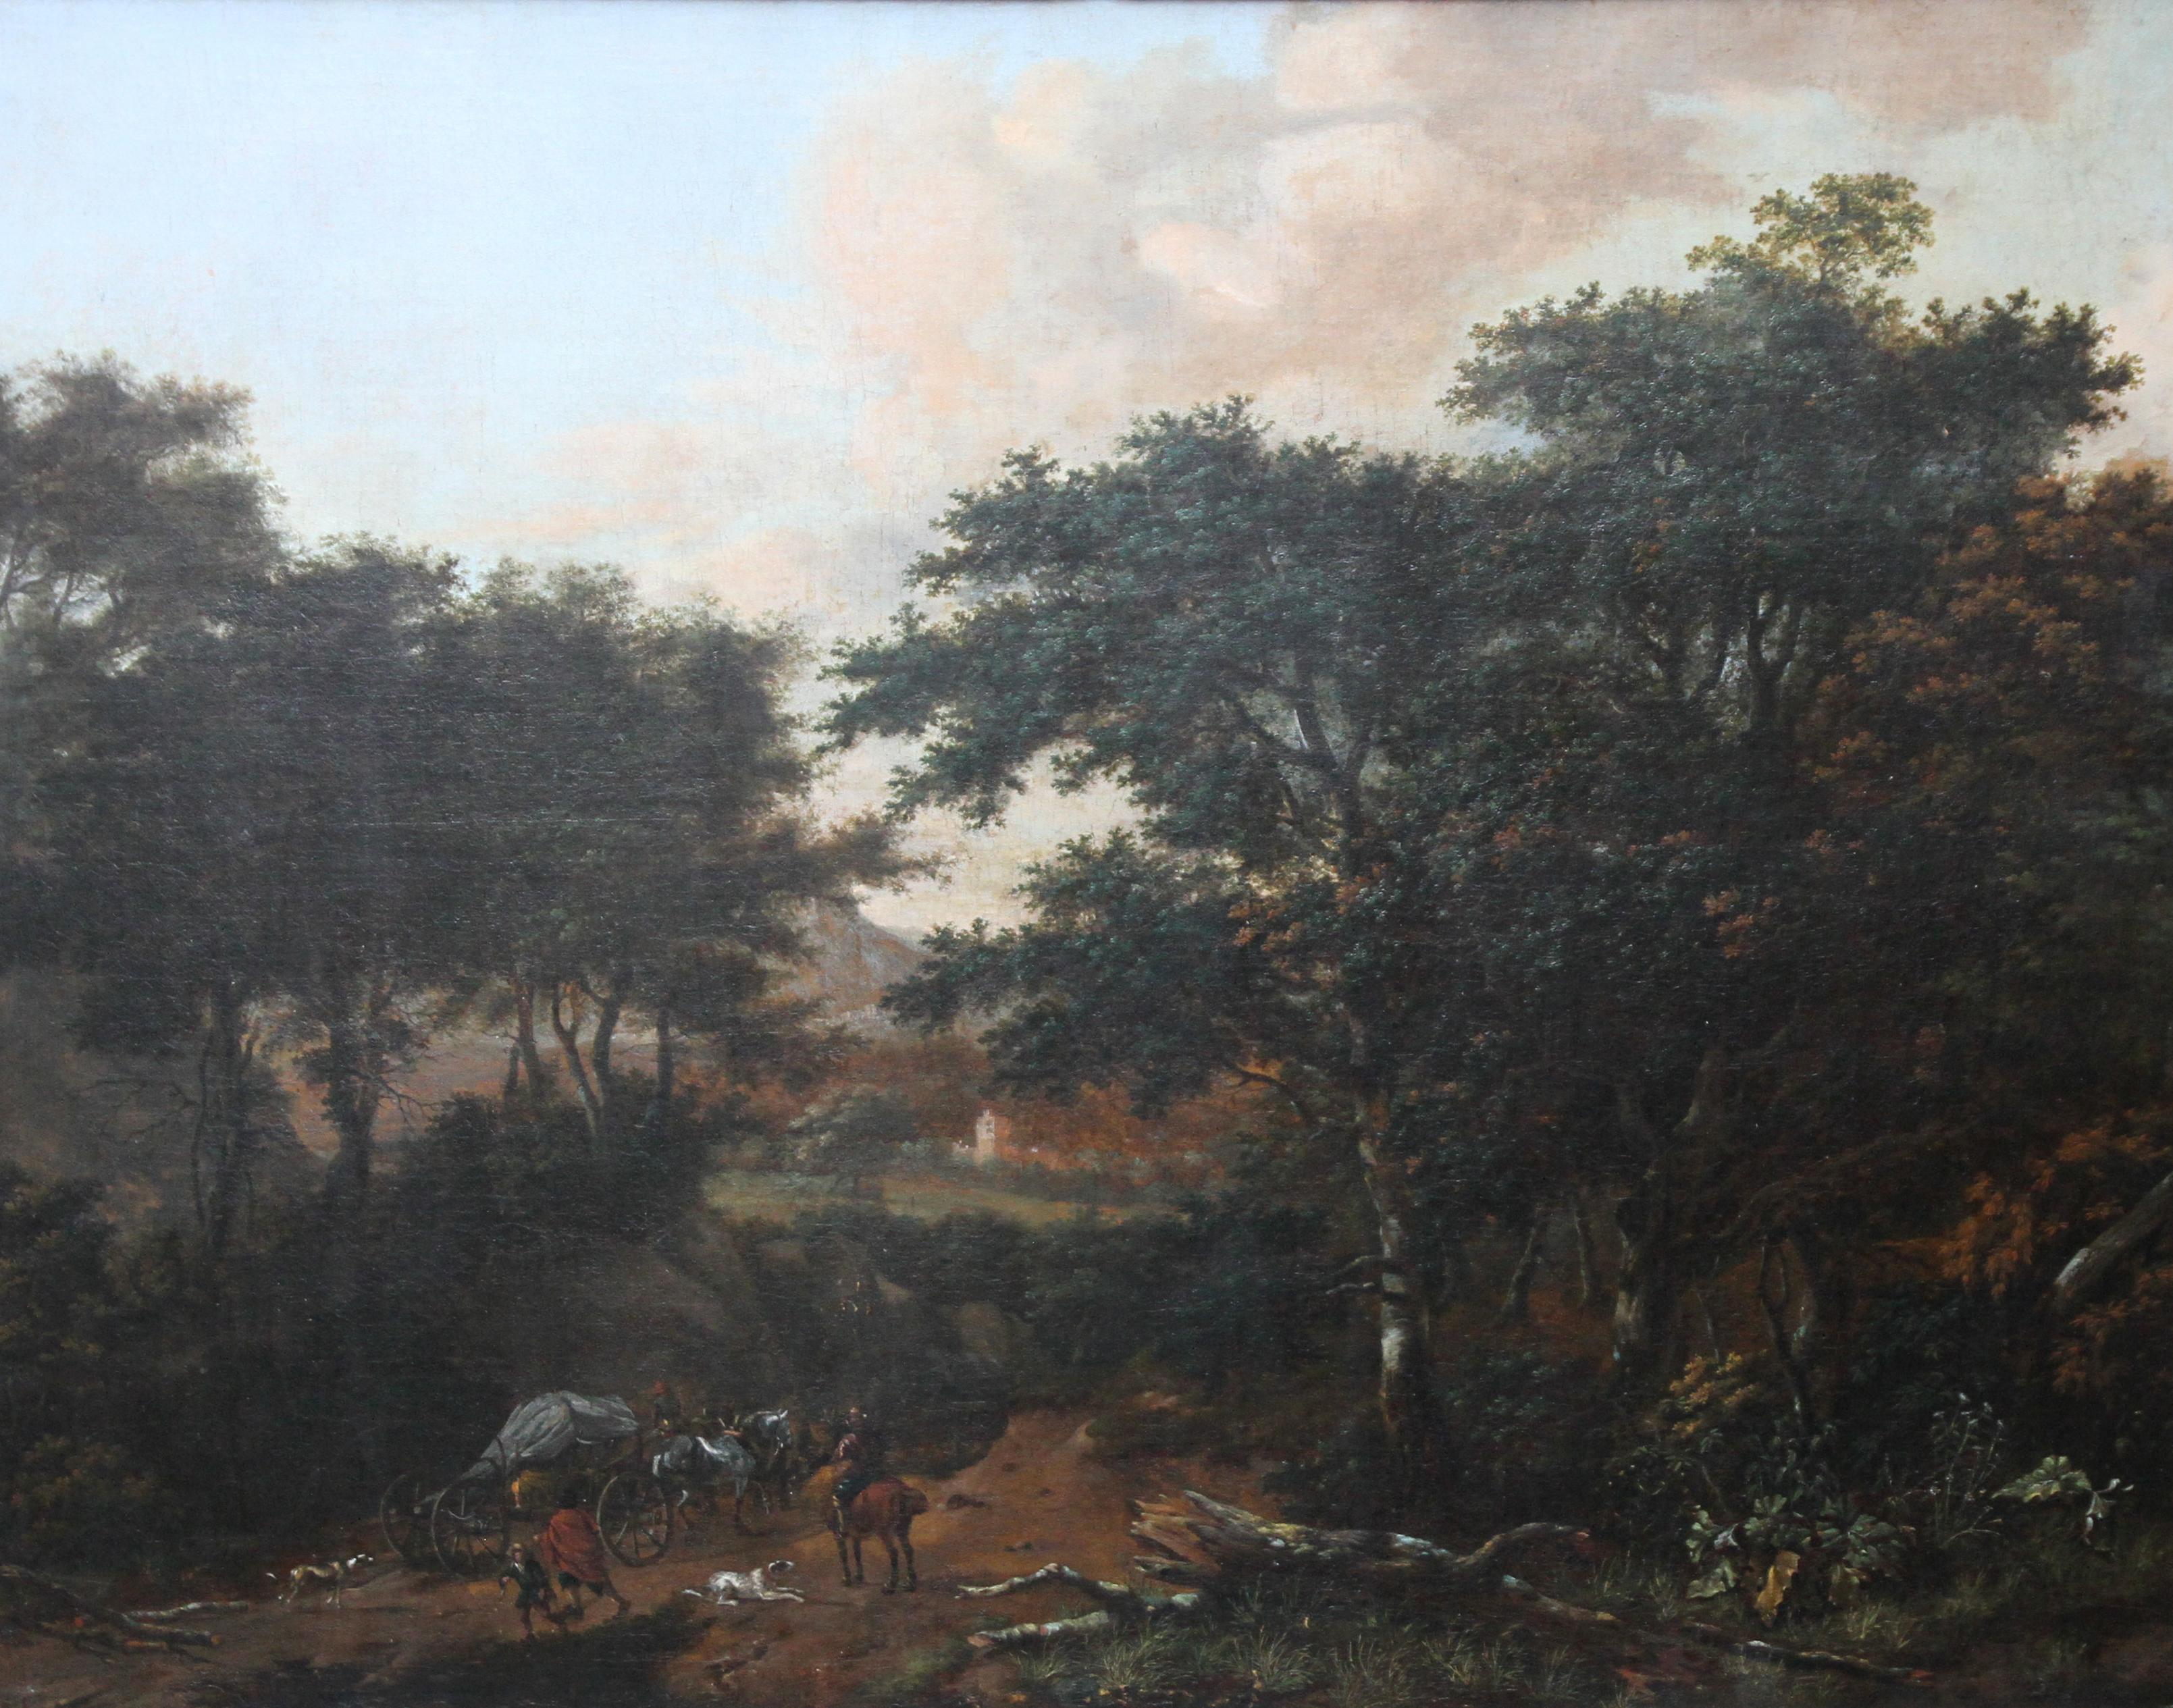 Travellers in Wooded Landscape - Dutch 17th century art Old Master oil painting - Painting by Jan Wijnants (circle)